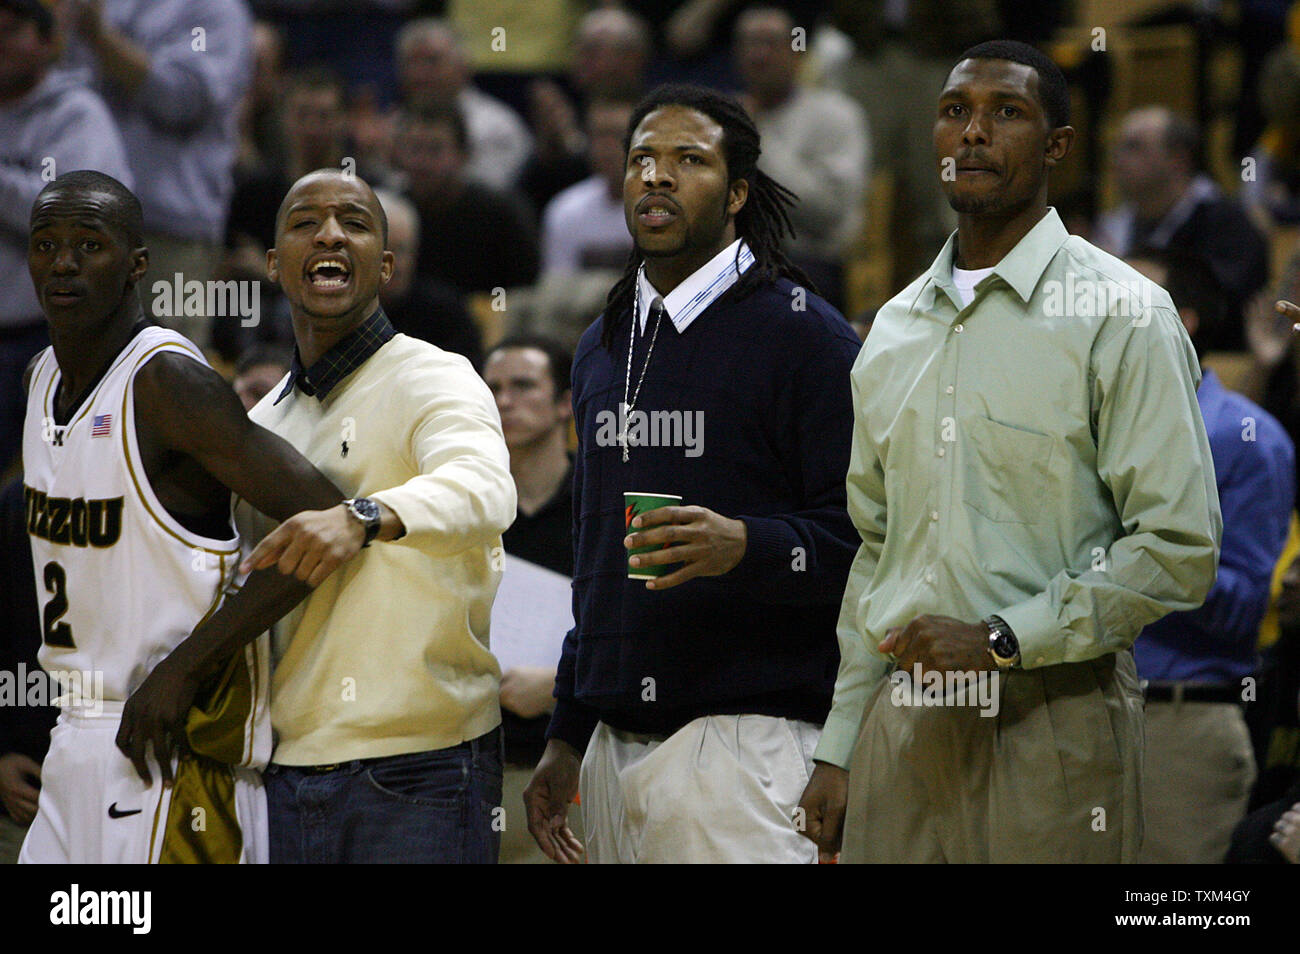 University of Missouri Tigers (L to R) Keon Lawrence, Jason Horton, Daryl Butterfield and Marshall Brown stand to watch as their teammates take on  the Nebraska Cornhuskers at the Mizzou Arena in Columbia, Missouri on January 30, 2008. Horton, Butterfield, Brown and two others were suspended by head basketball coach Mike Anderson after the five were involved in a fight outside of a Columbia, Missouri nightclub on January 27. (UPI Photo/Bill Greenblatt) Stock Photo